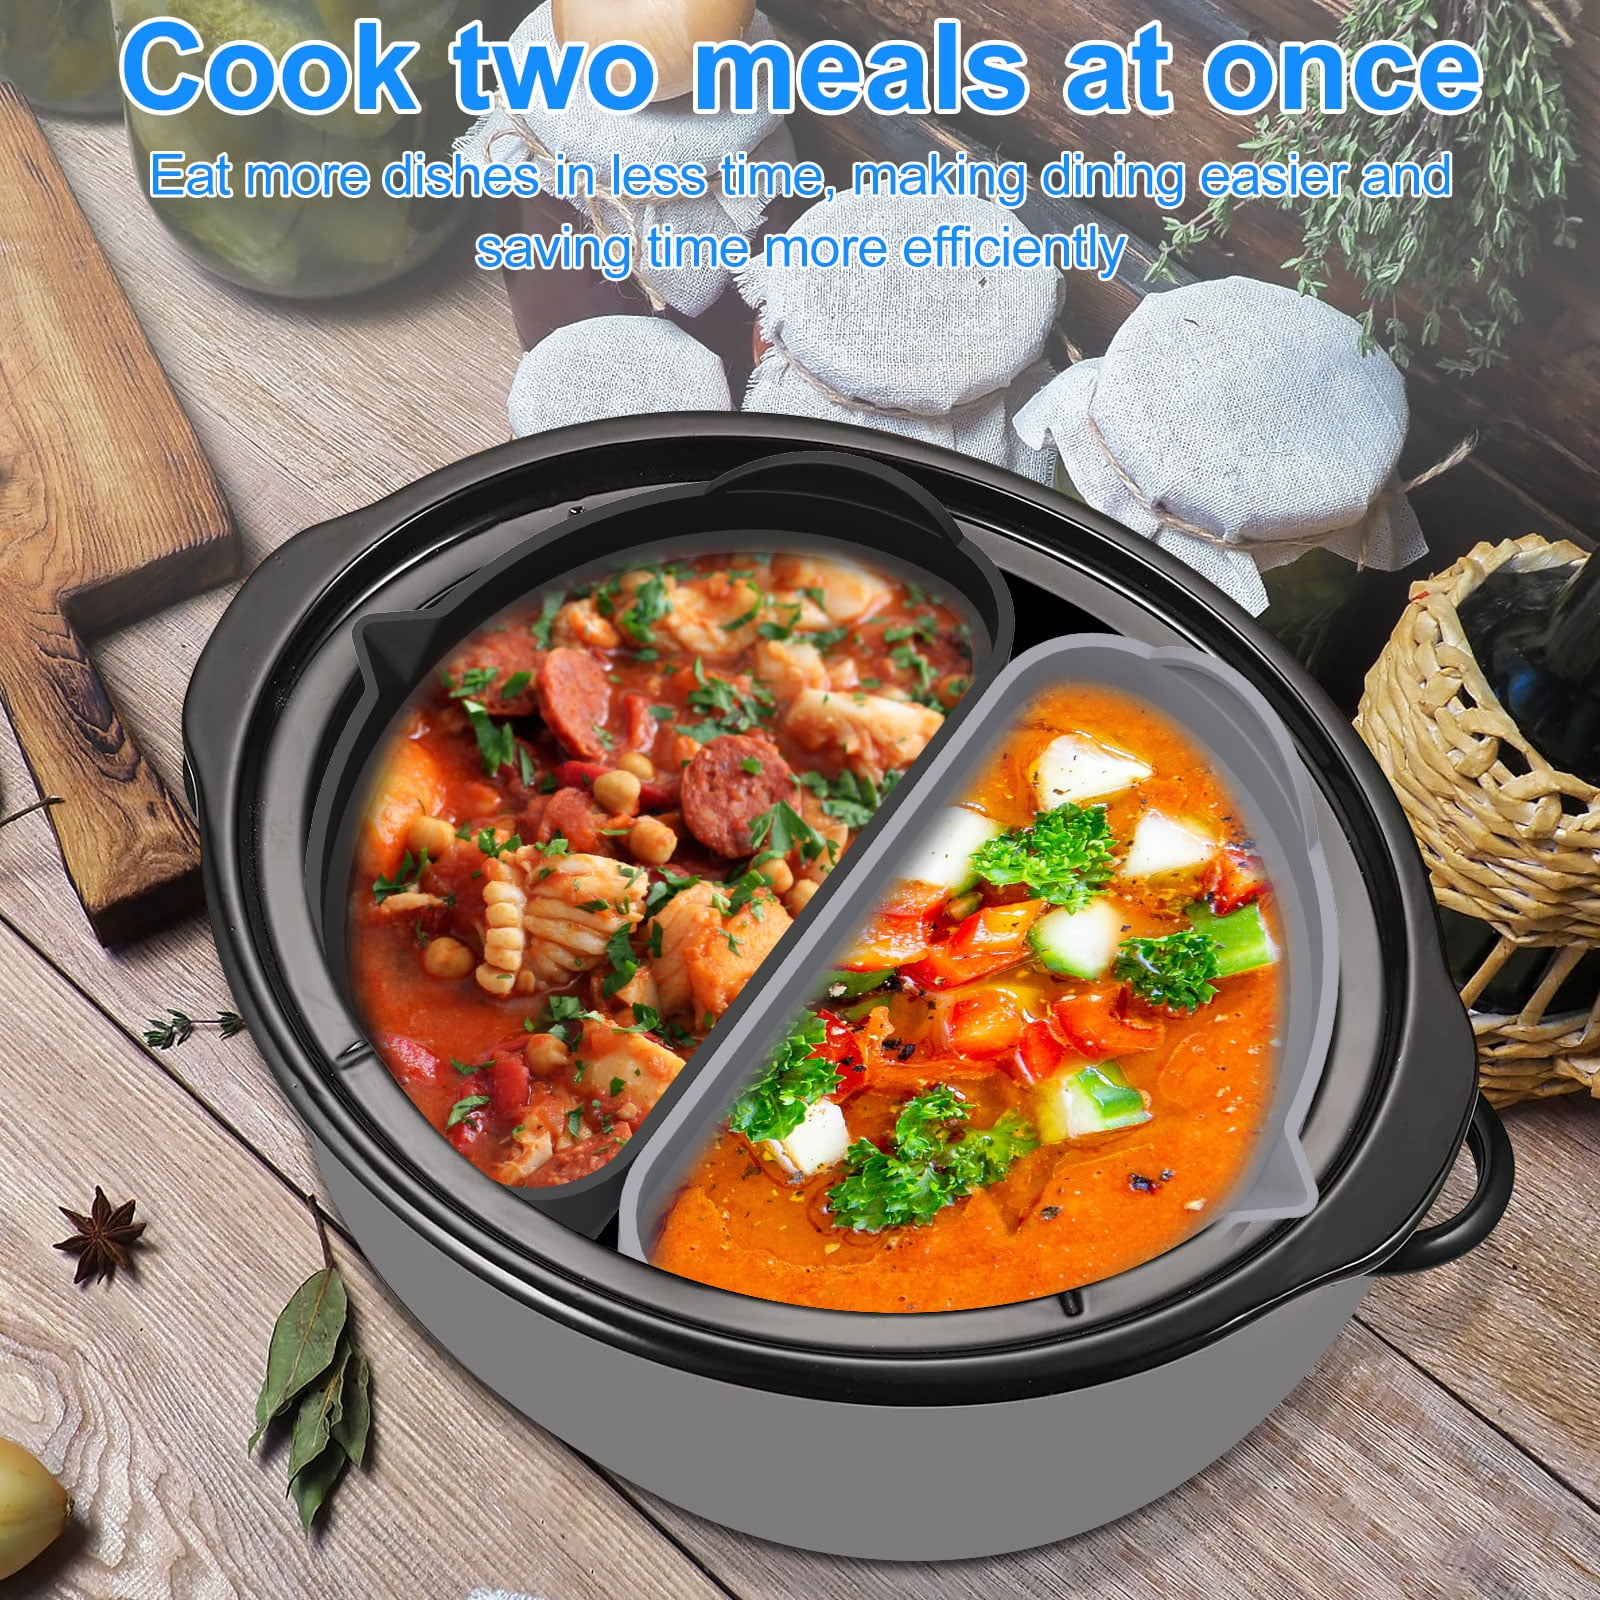 anlinkshine RNAB0BYXHLJVQ silicone slow cooker divider liners compatible  with crockpot 6qt, reusable slow cooker crock pot divider insert (3 in 1)